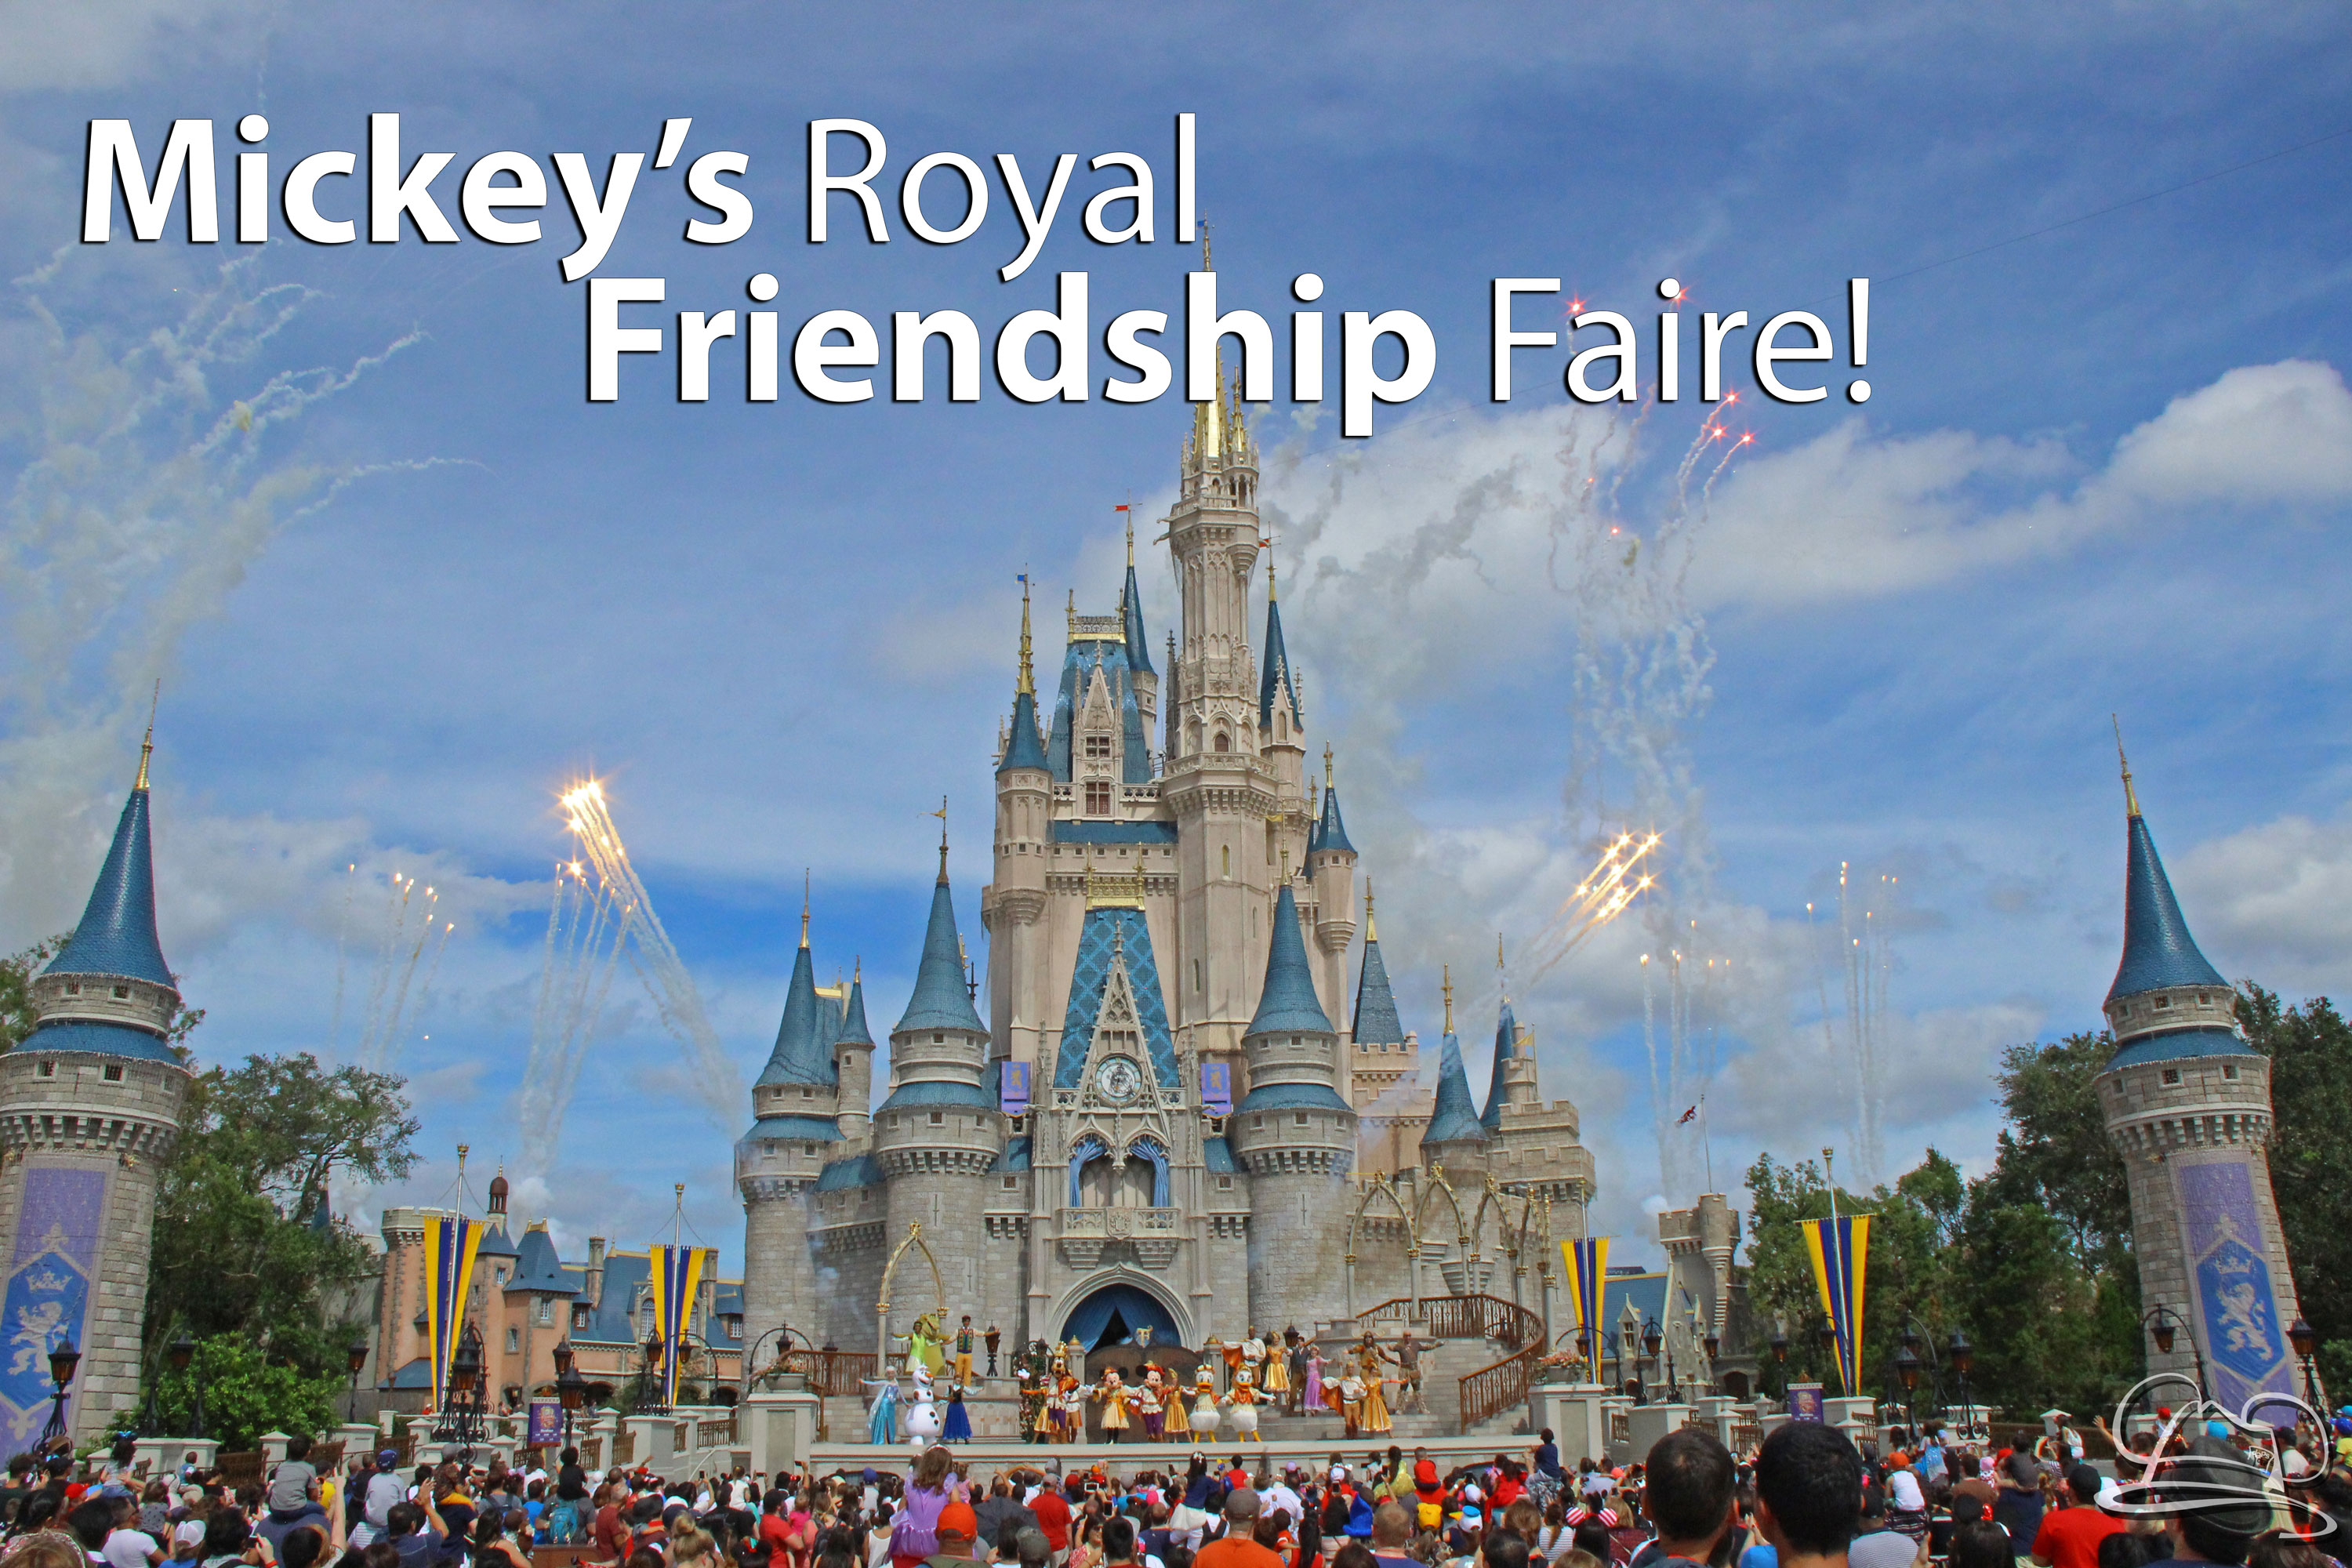 Fun is Found at Mickey’s Royal Friendship Faire at the Magic Kingdom